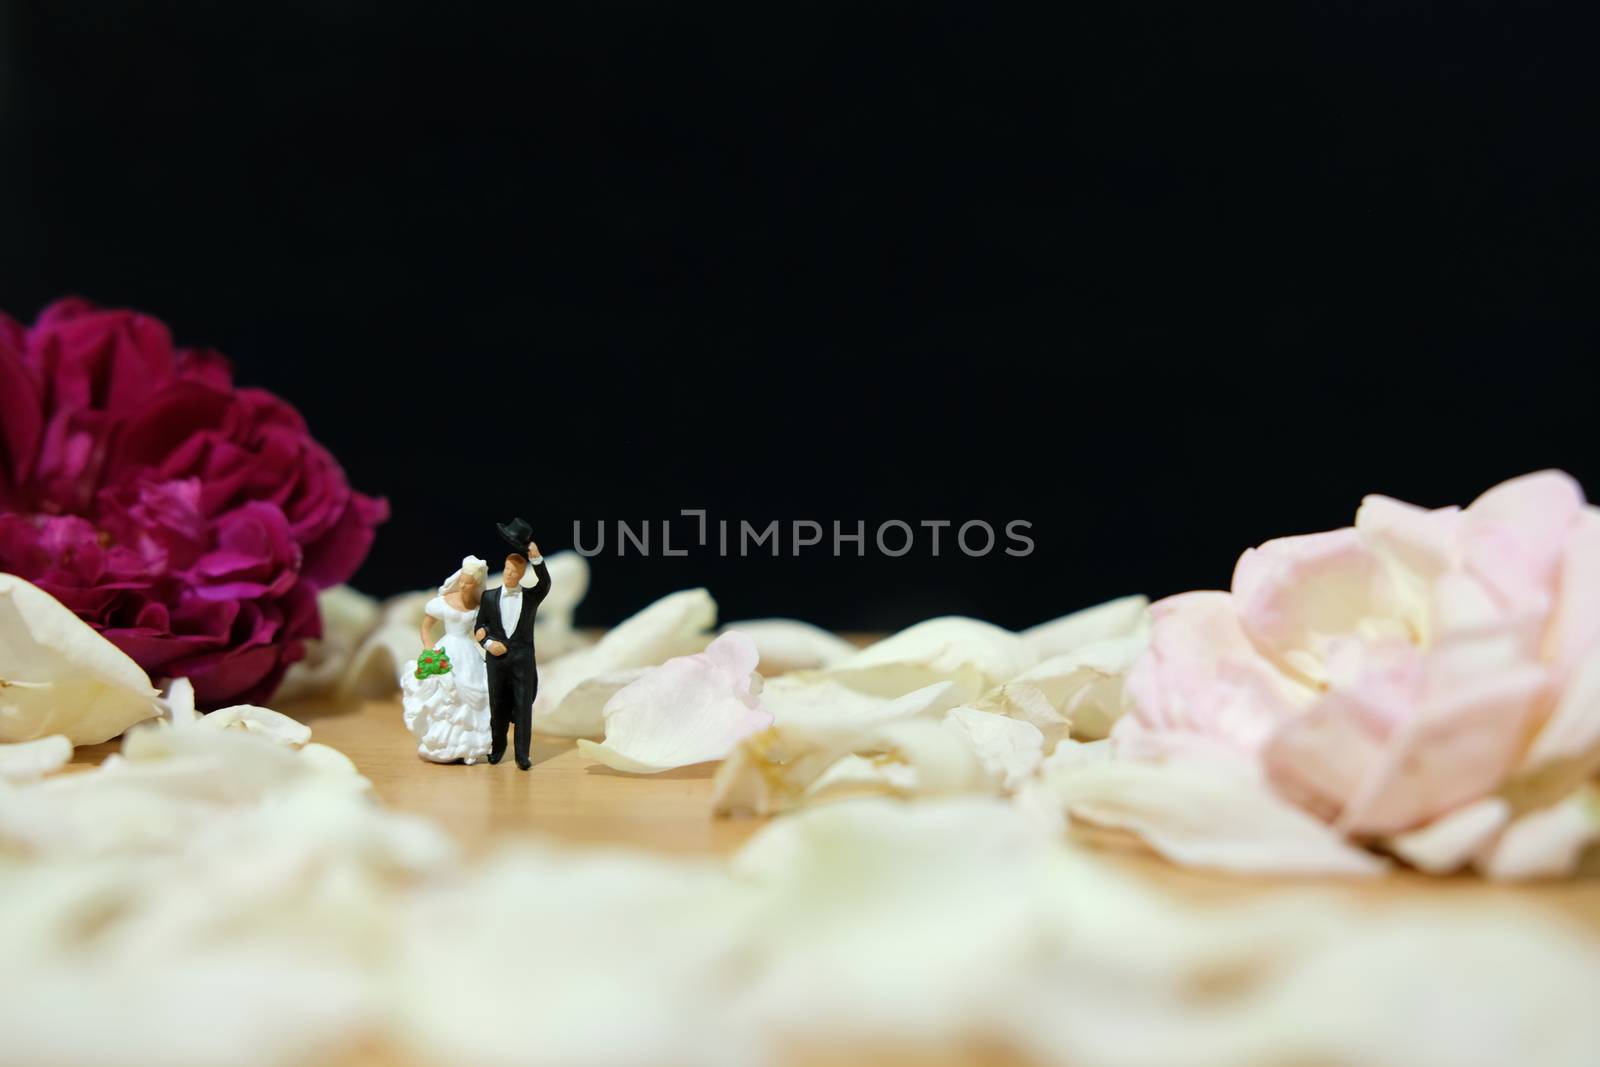 Miniature photography - outdoor garden wedding ceremony concept, bride and groom walking on white rose flower pile